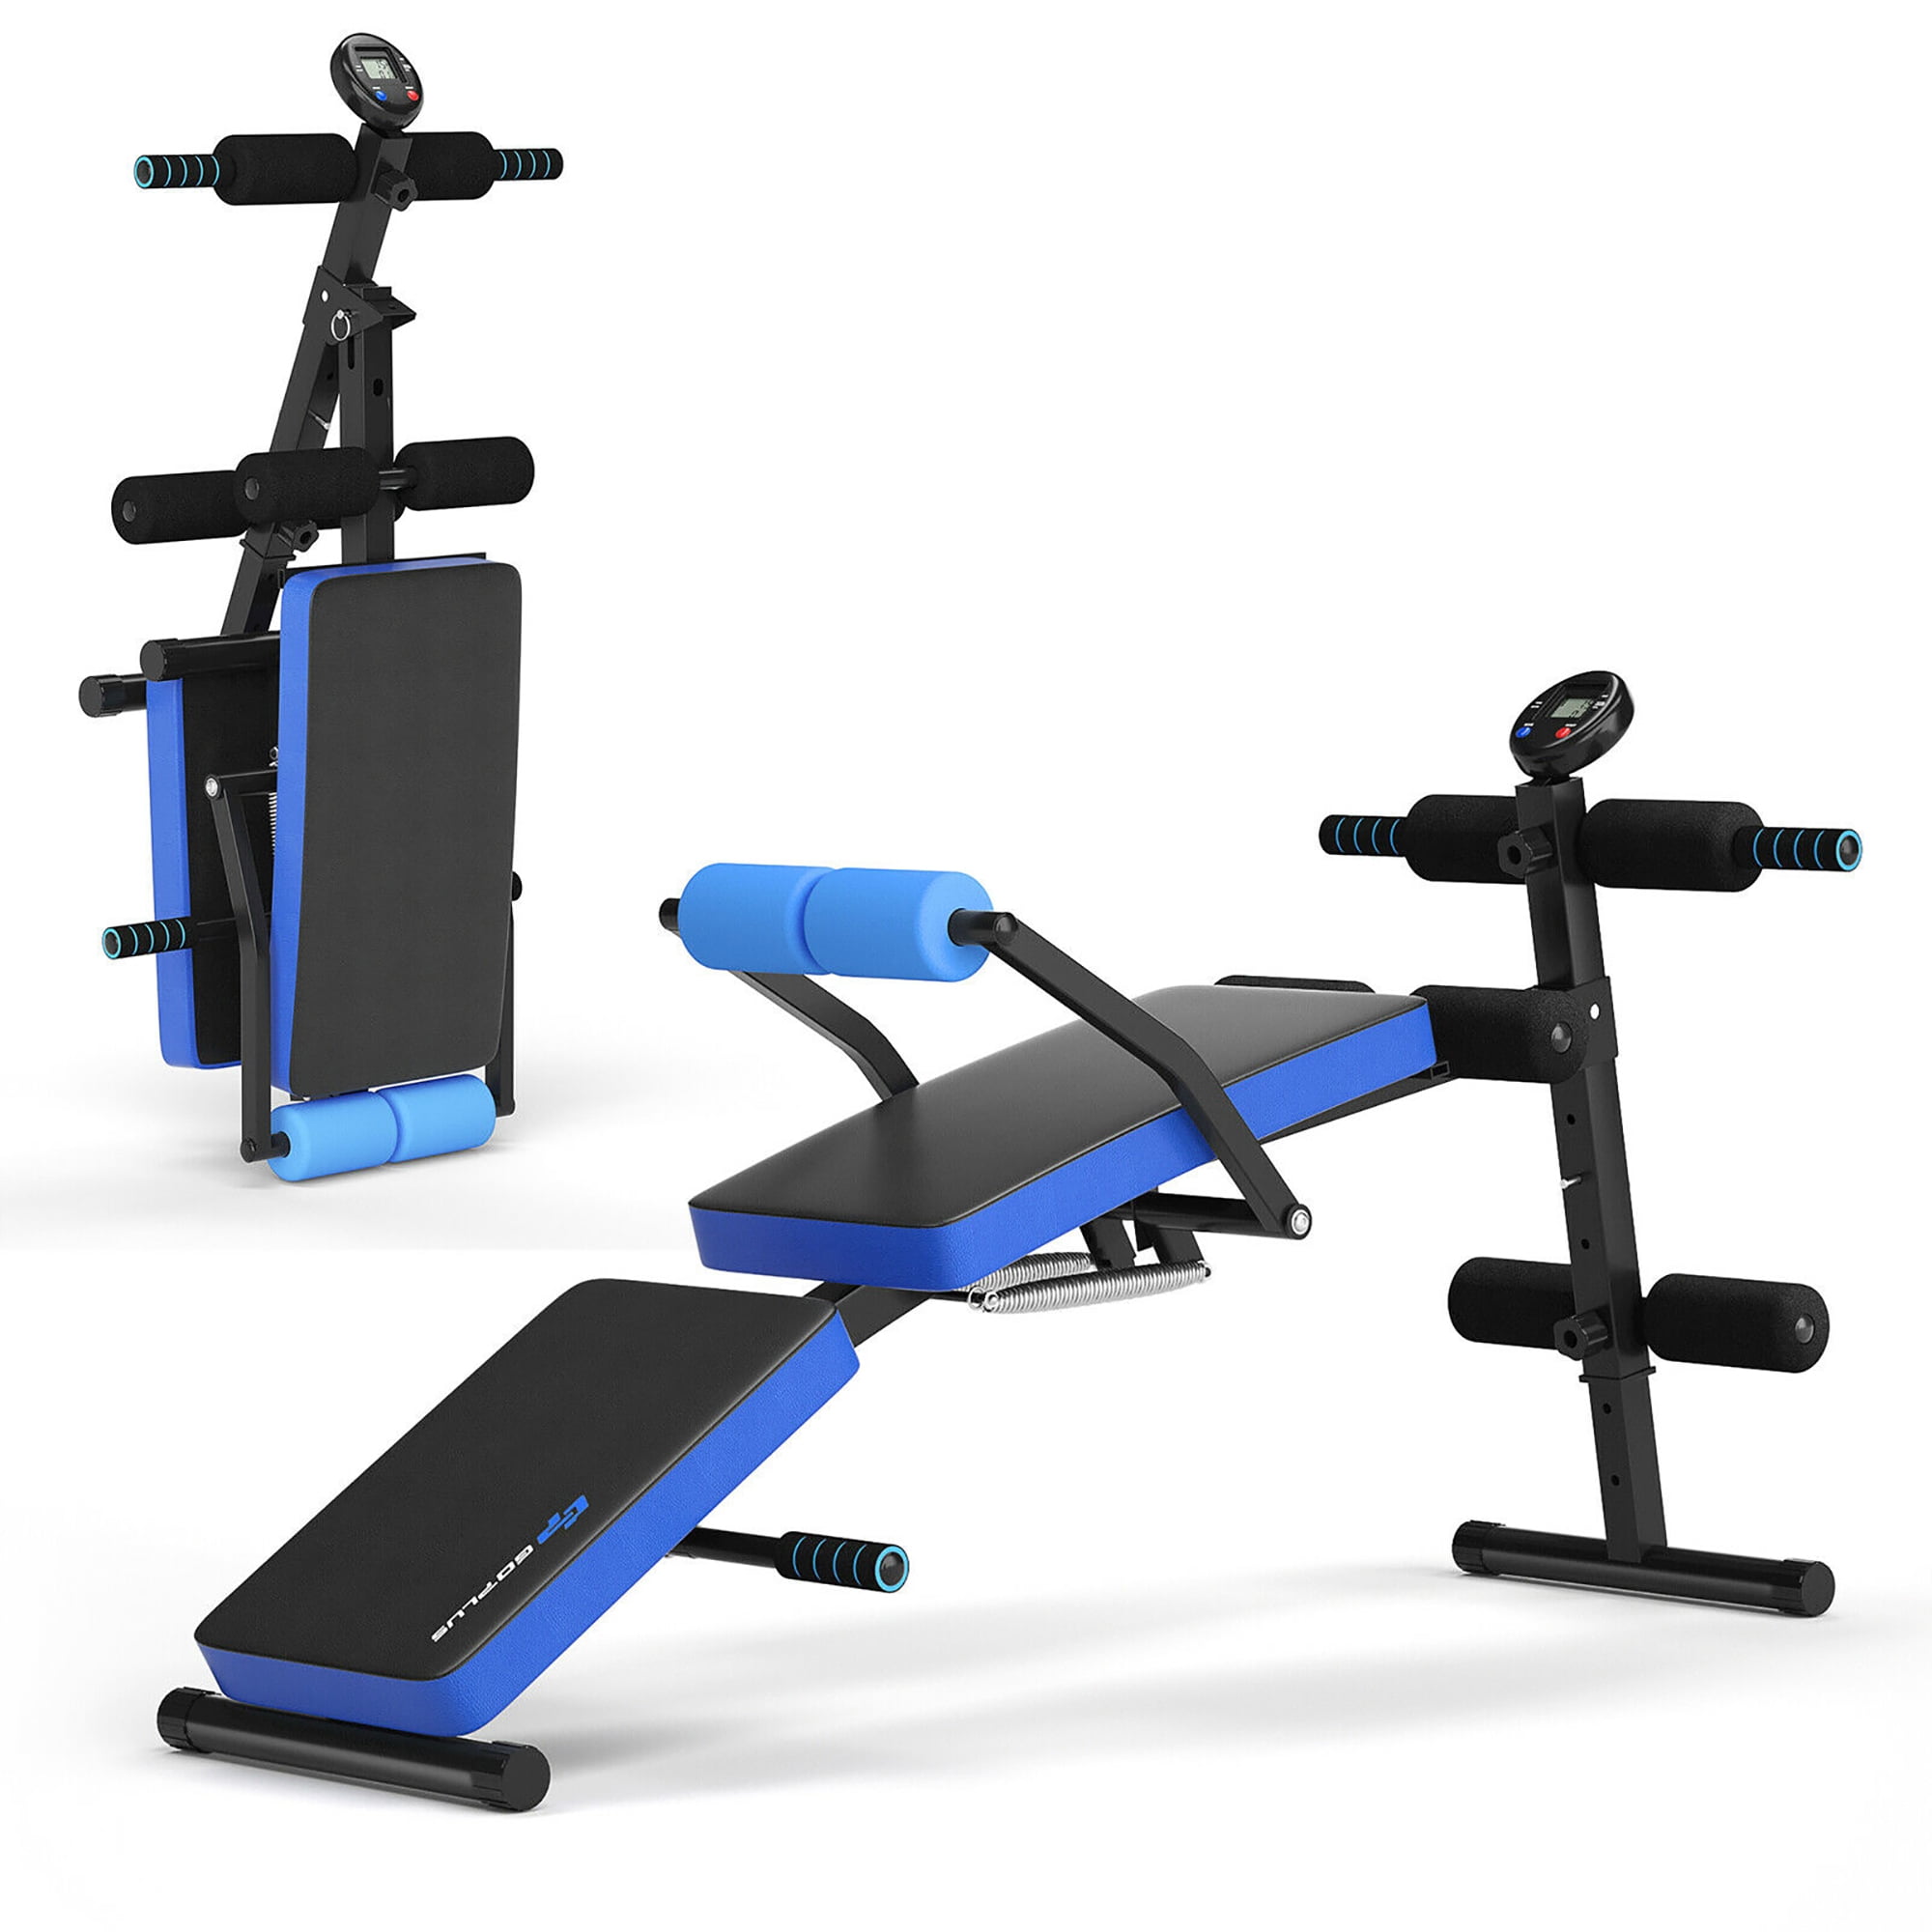 Sit Up Bench Adjustable Decline Ab Workout Bench Multifunctional ine Board Abdominal Exercise Fitness Equipment with LED Monitor Display for Women and Men Home Gym Full Body Workout 